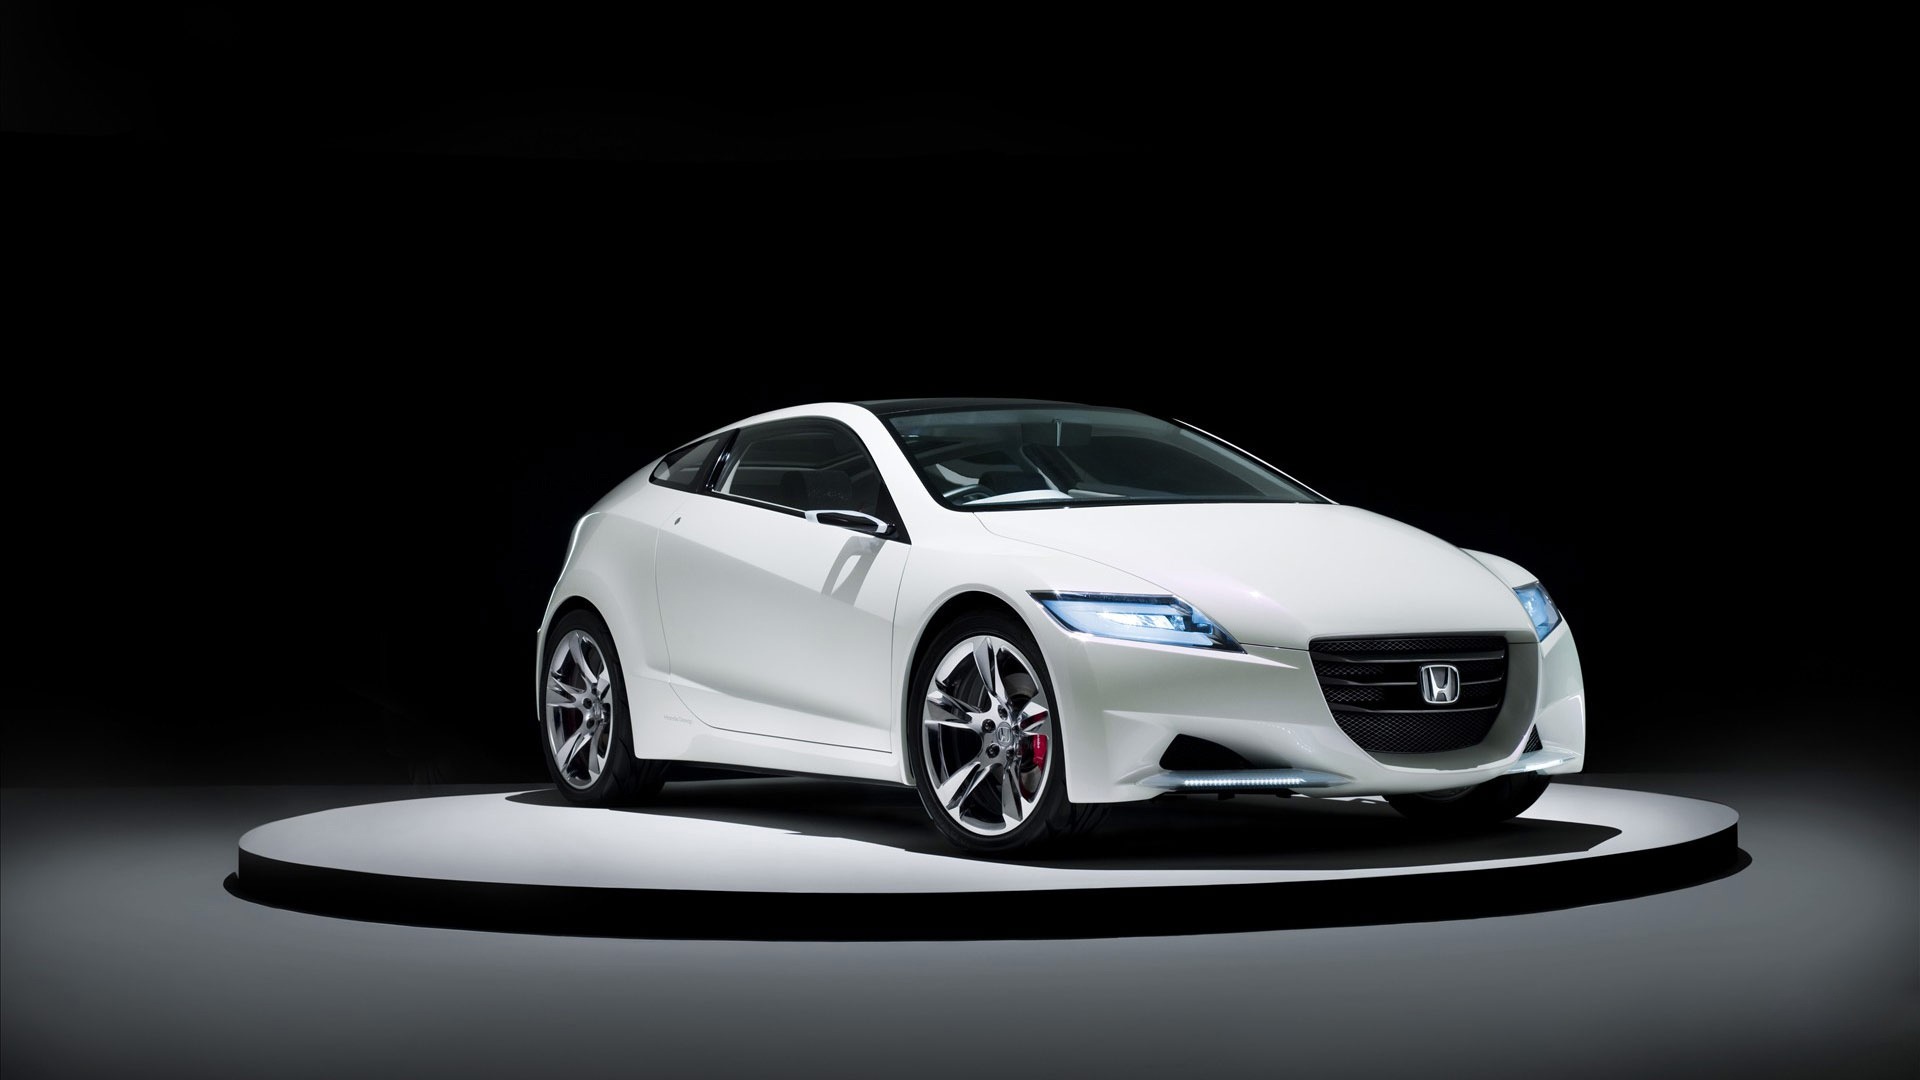 Honda Cr Z Wallpaper Concept Cars Wallpapers In Jpg Format For Free Download